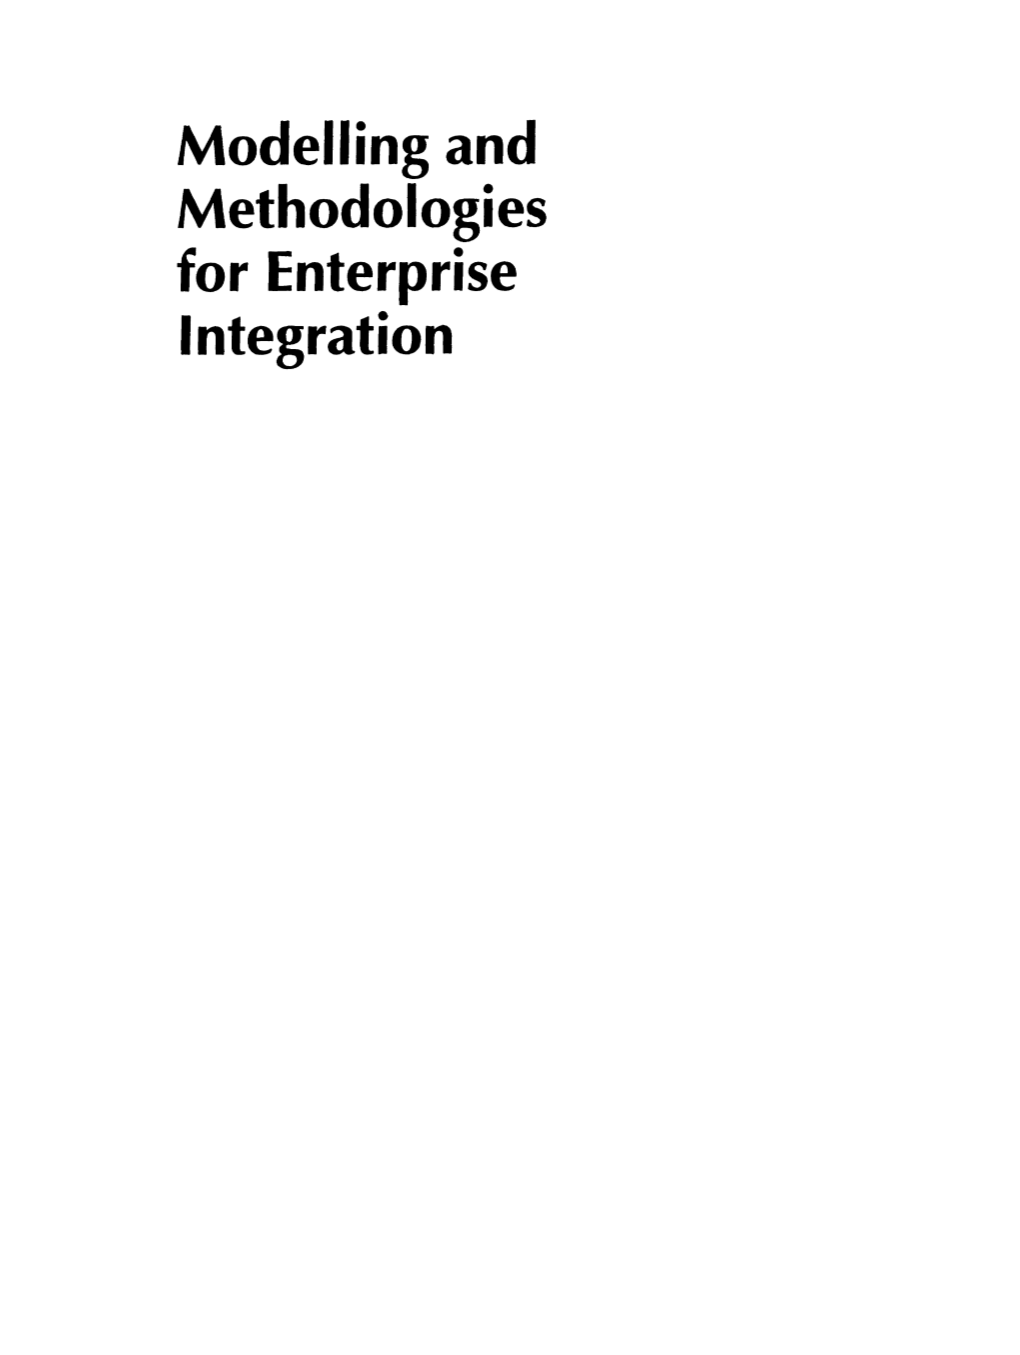 Modelling and Methodologies for Enterprise Integration IFIP - the International Federation for Information Processing